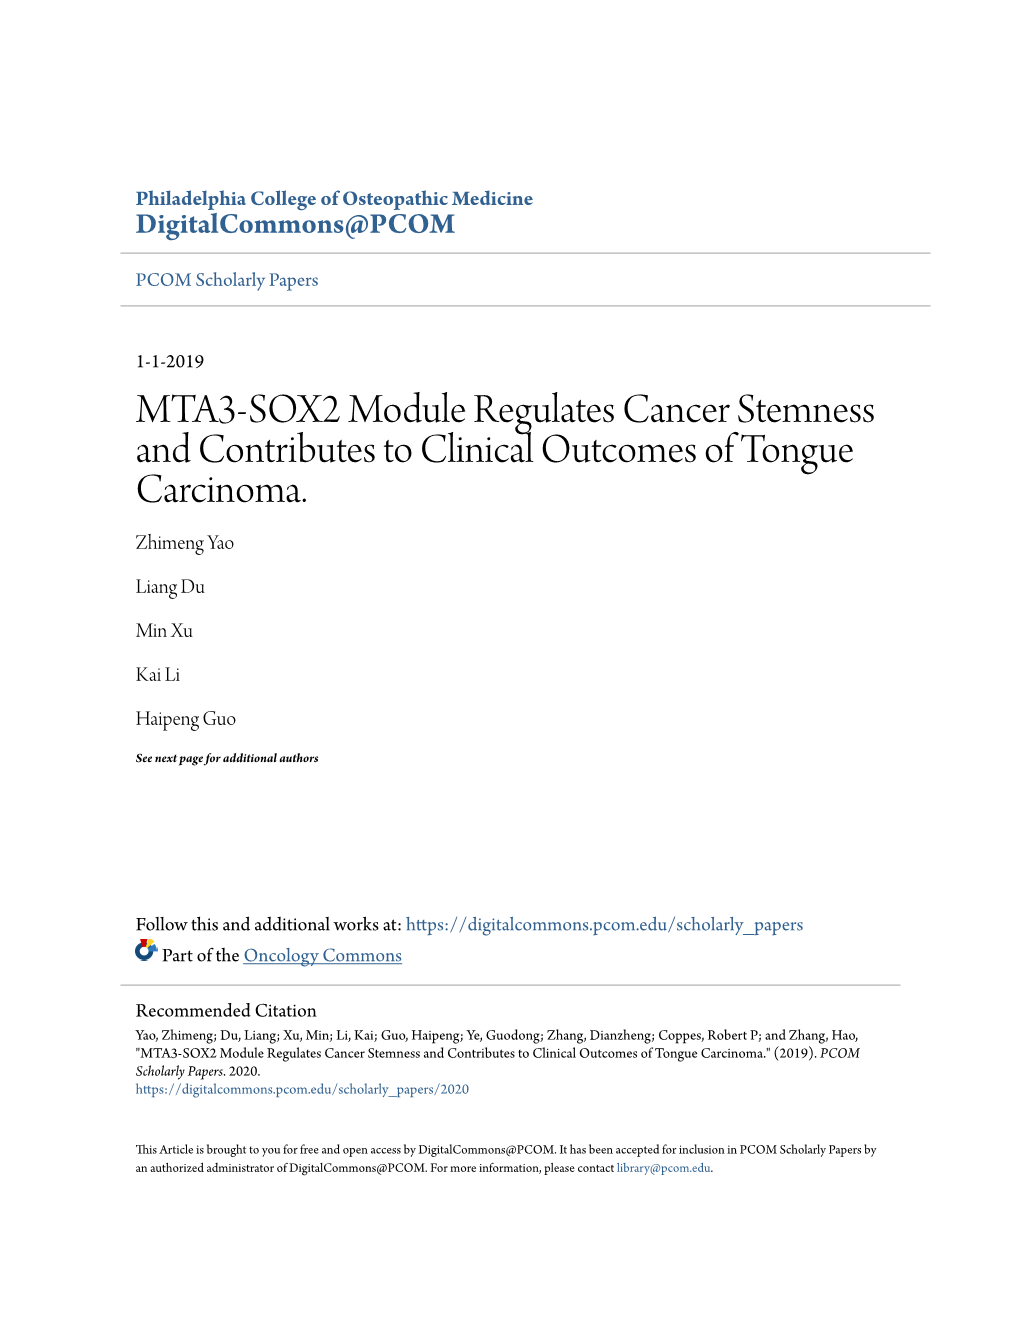 MTA3-SOX2 Module Regulates Cancer Stemness and Contributes to Clinical Outcomes of Tongue Carcinoma